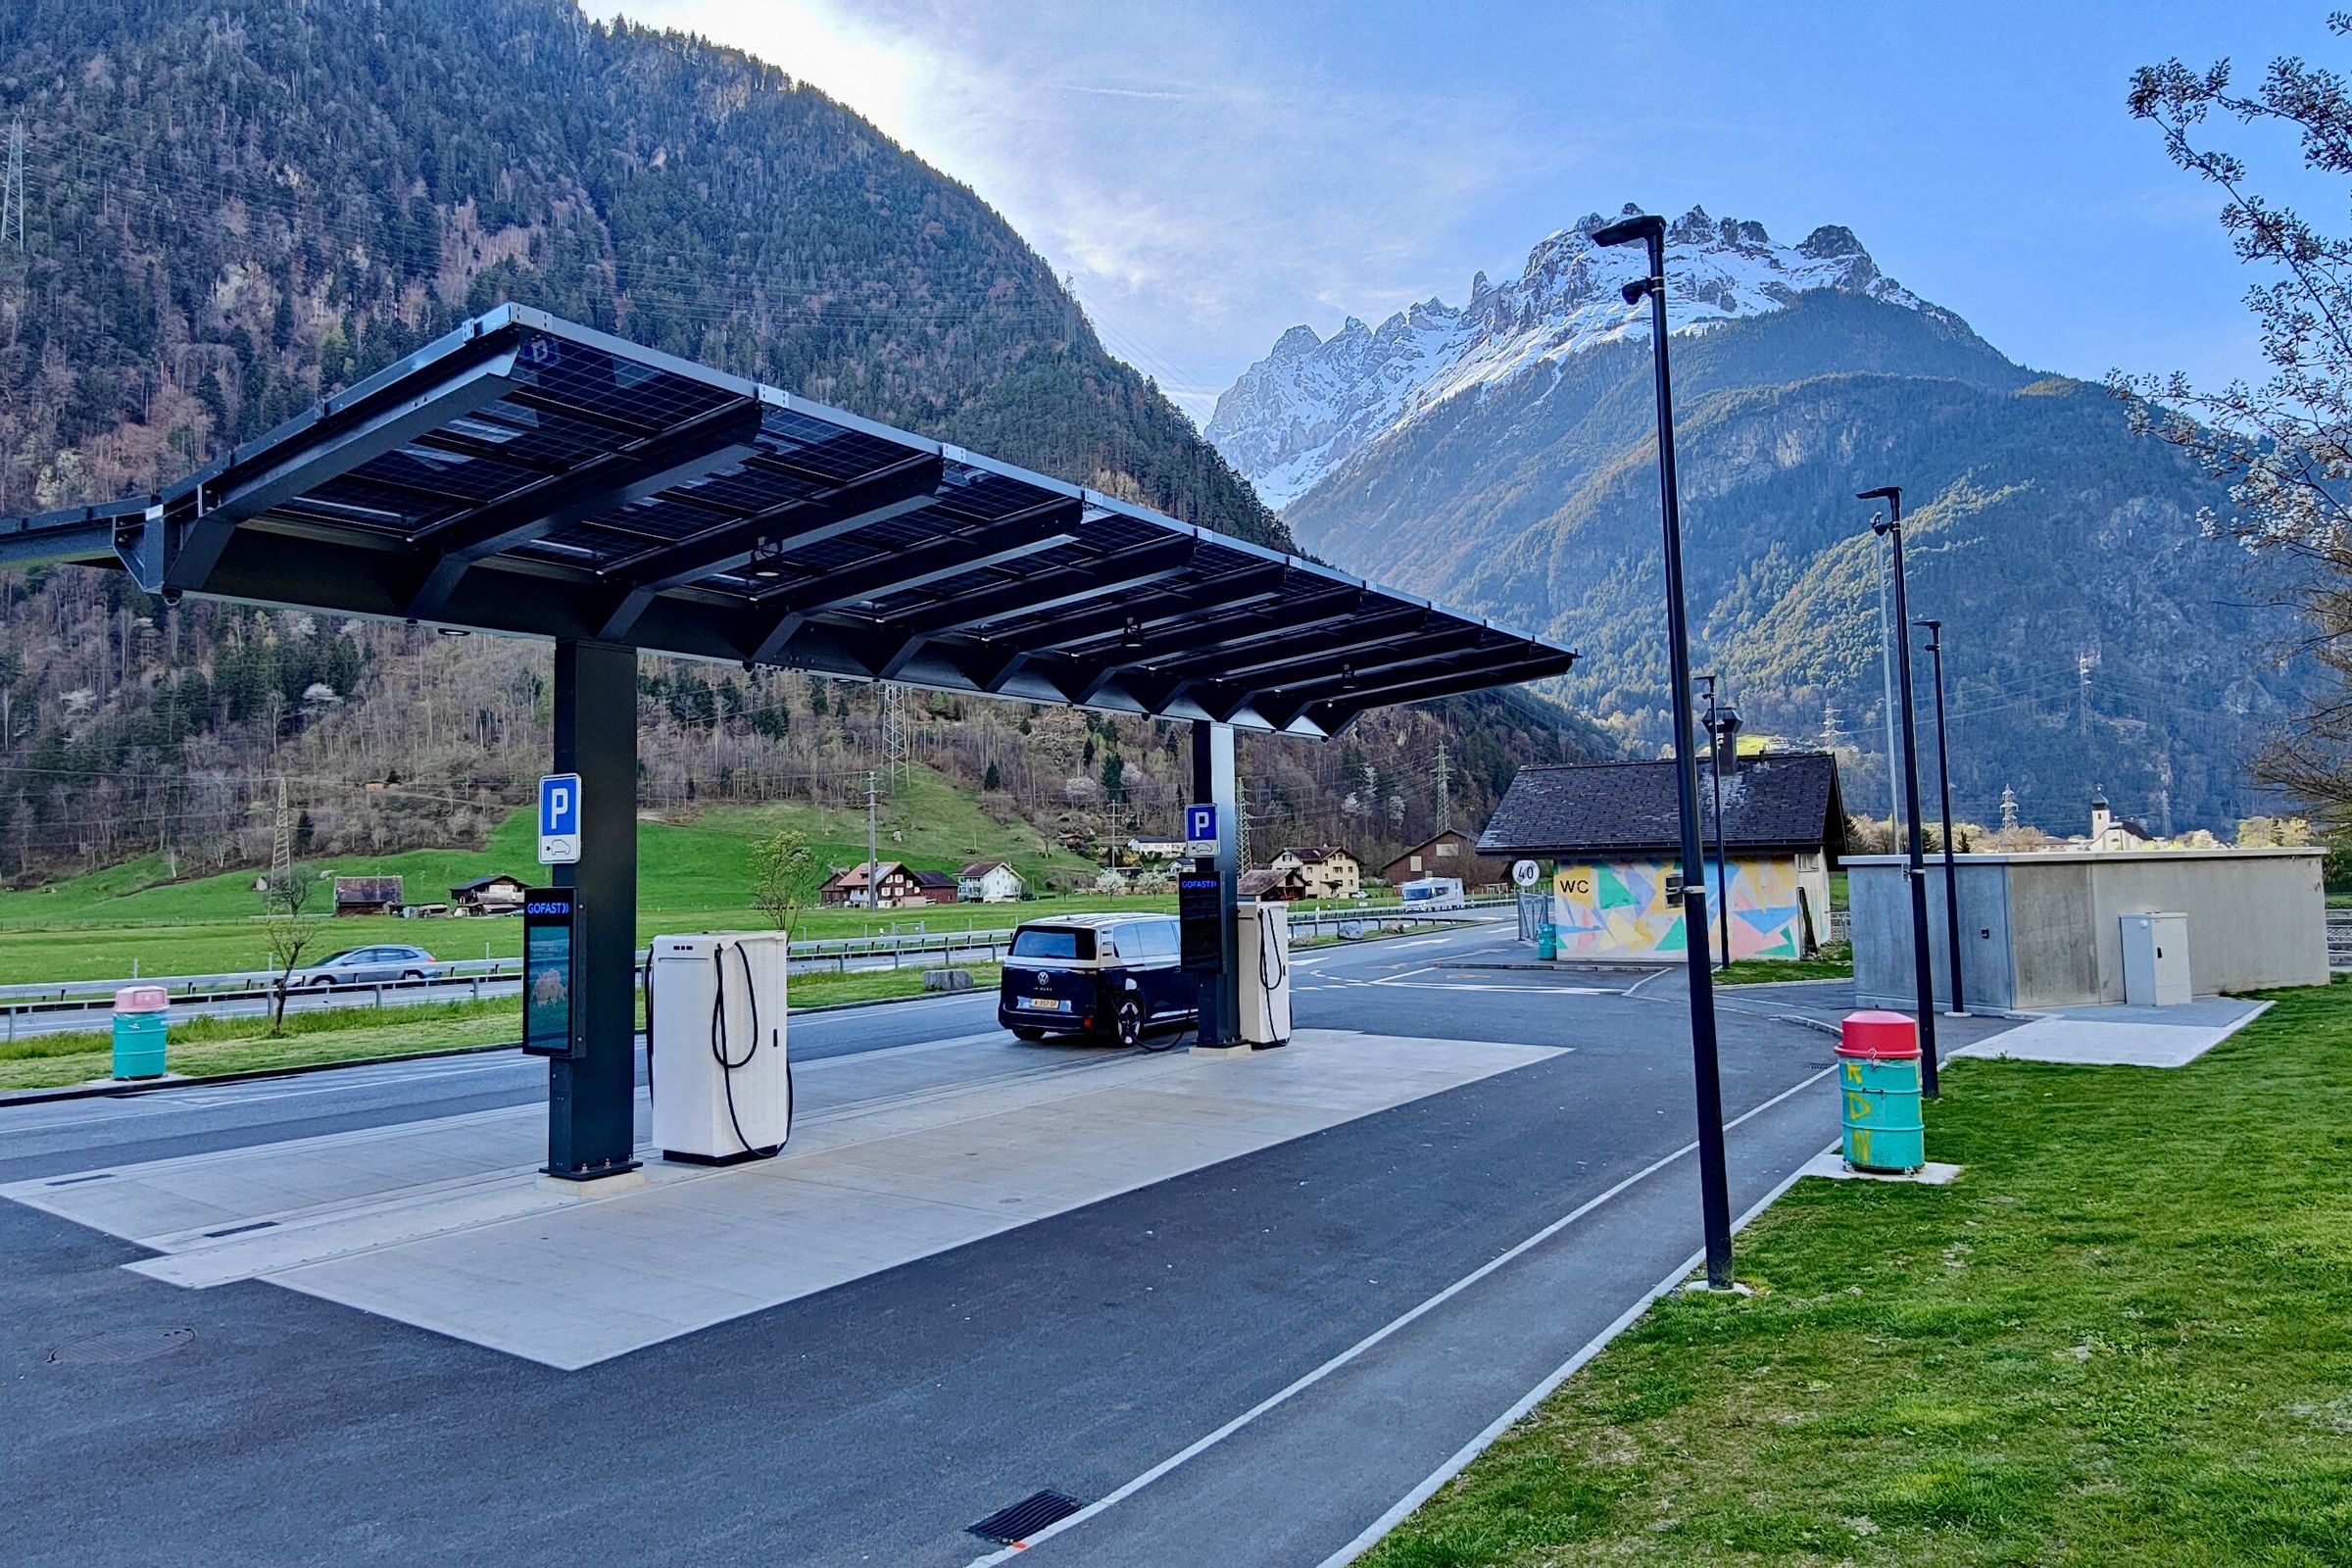 A typical scene at ultra-fast charging stations in Europe: everything working and lots of availability. This one had a long protected walking path for the dog along the right-hand side bordering a creek.